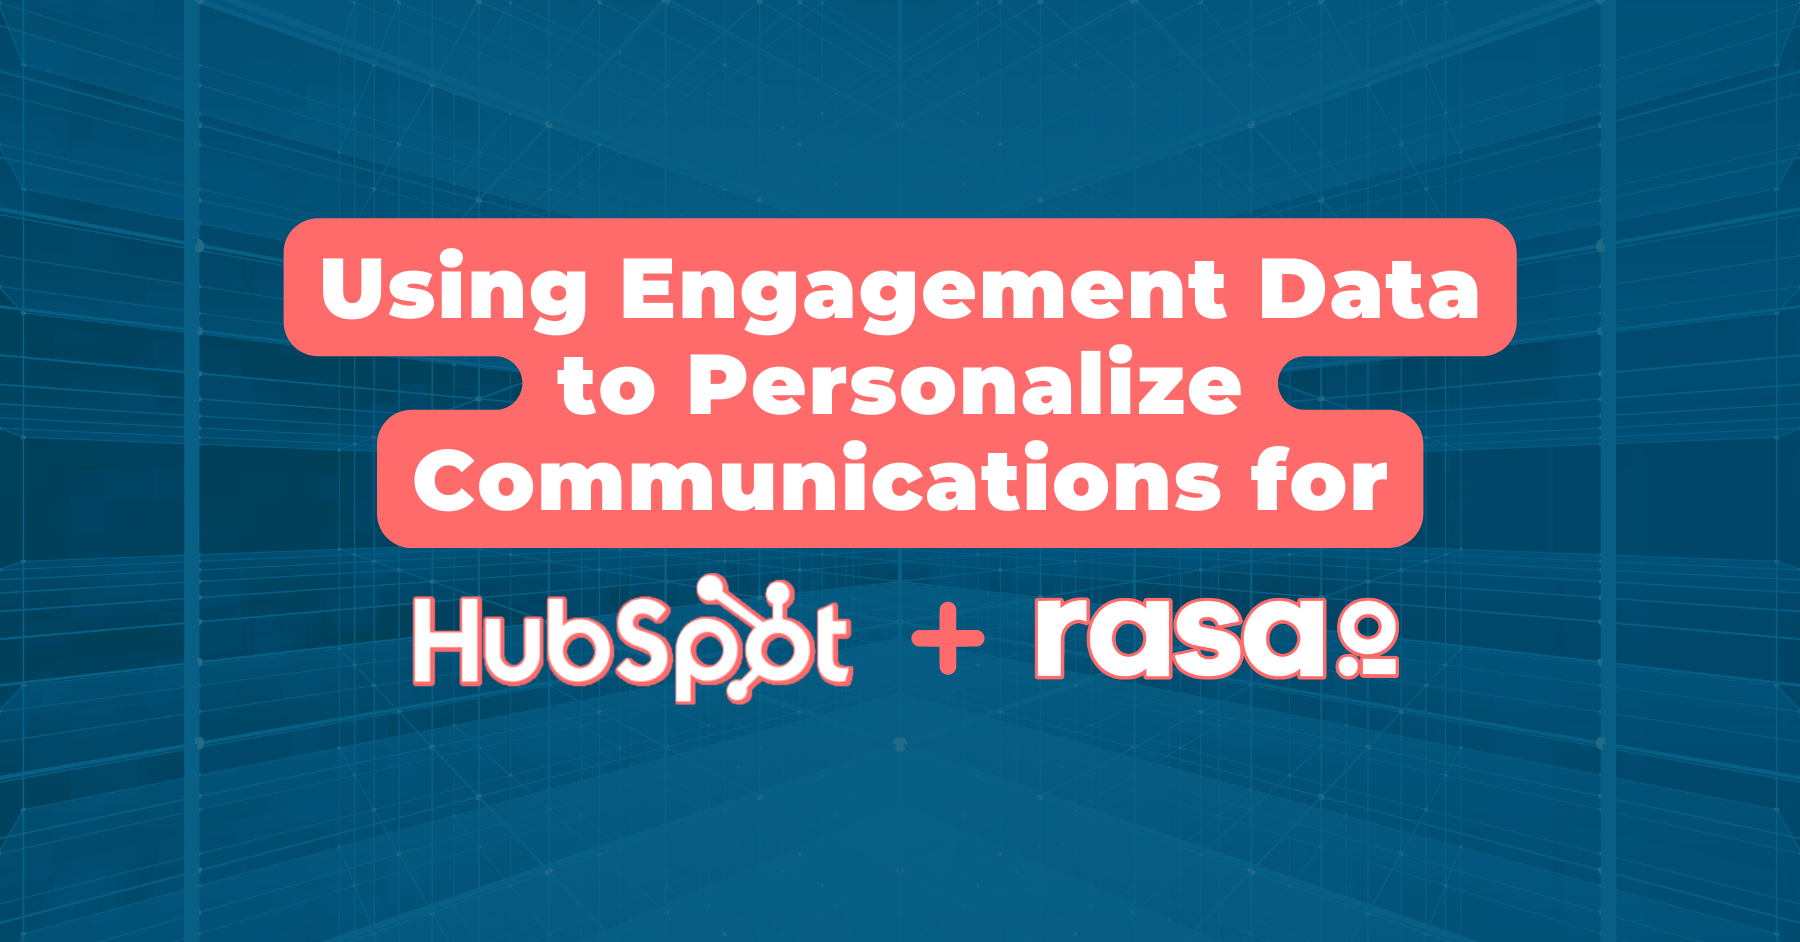 Using Engagement Data to Personalize Communications for rasa.io and HubSpot